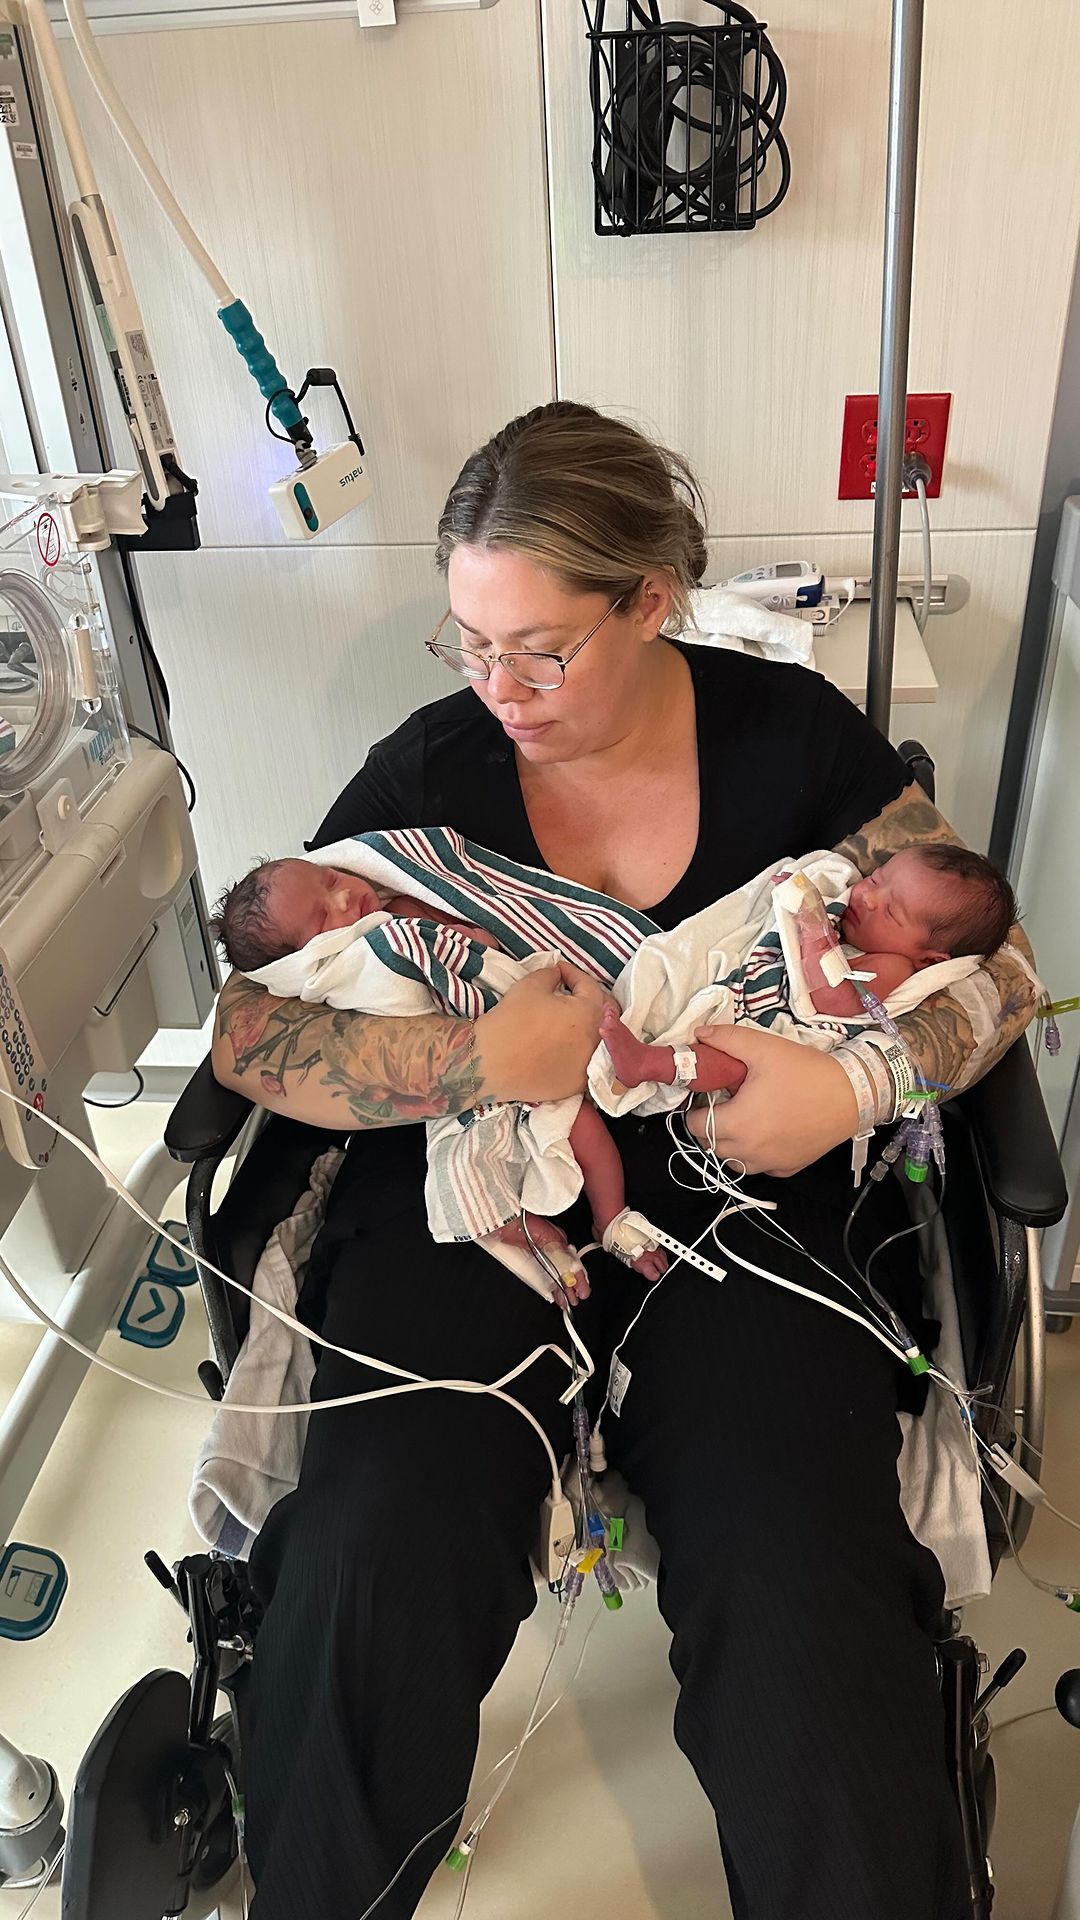 Kailyn welcomed twins - Valley and Verse - in November